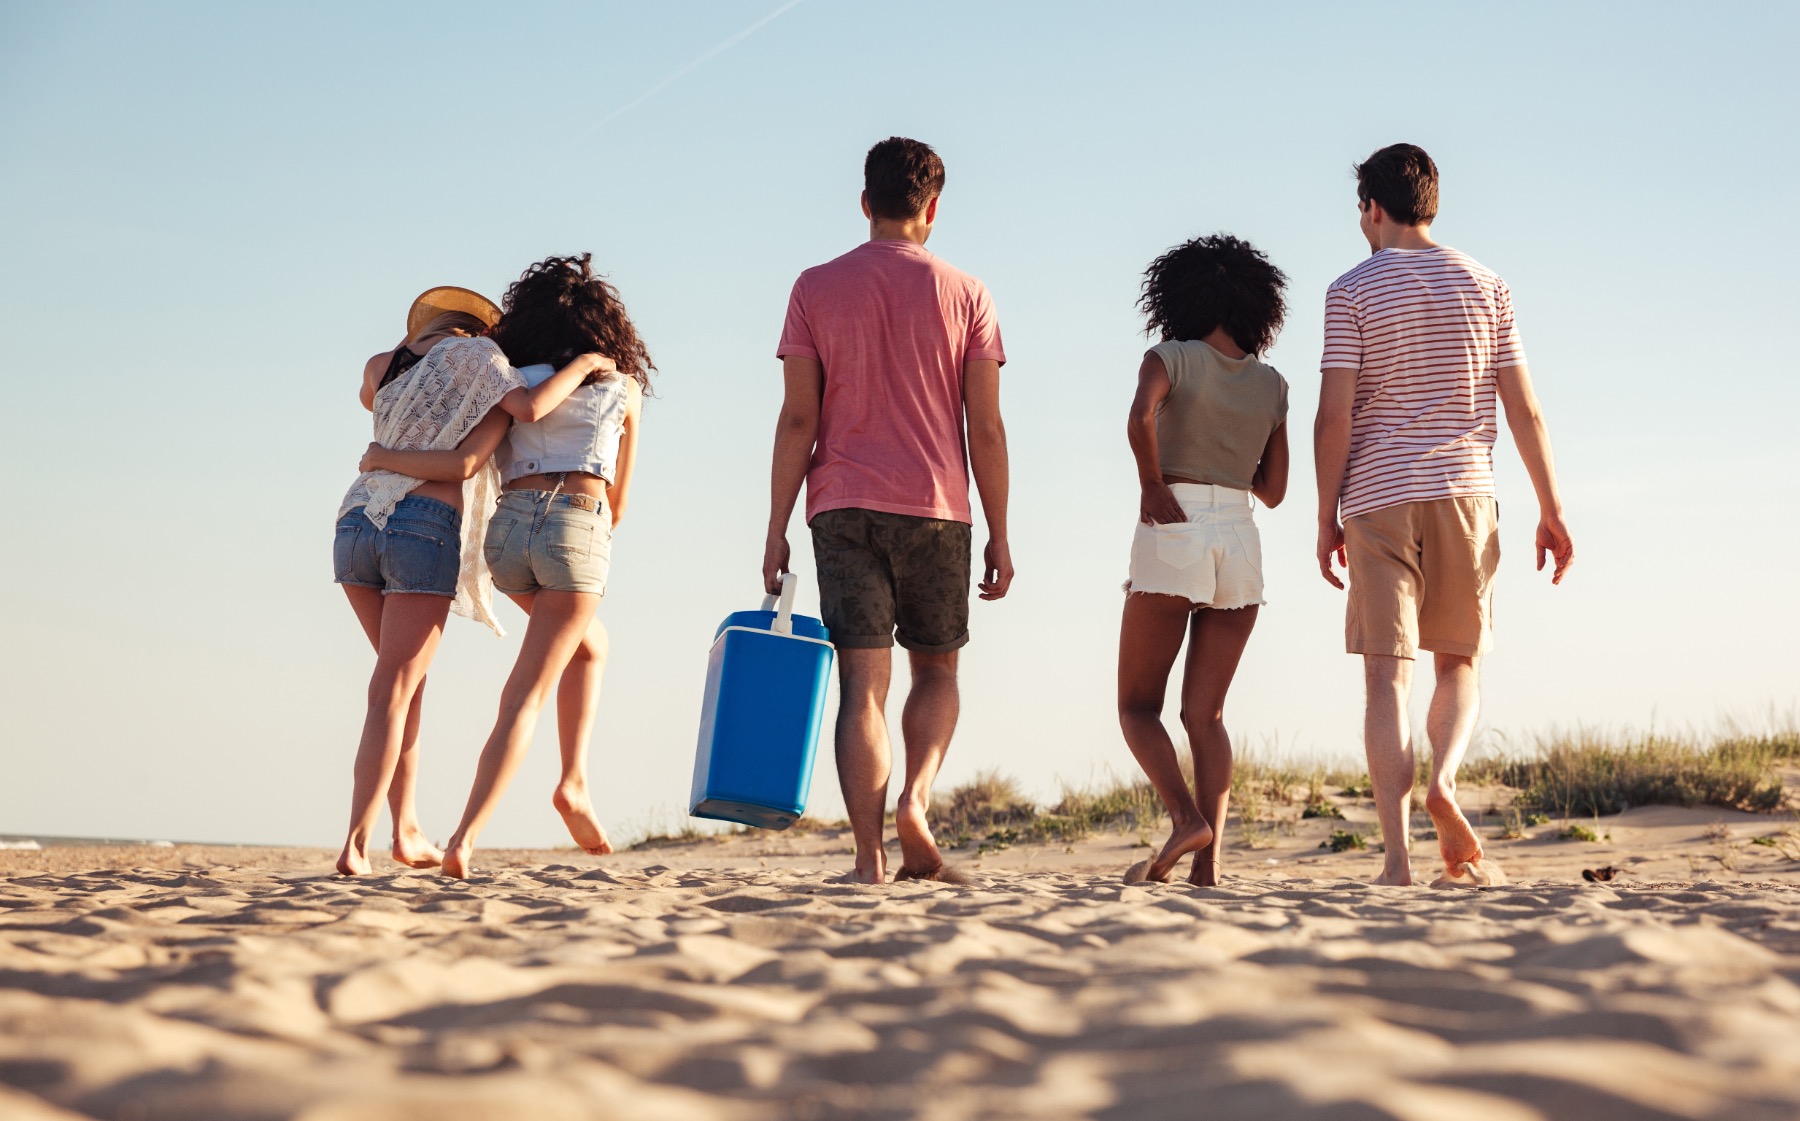 5 young people walking on a beach